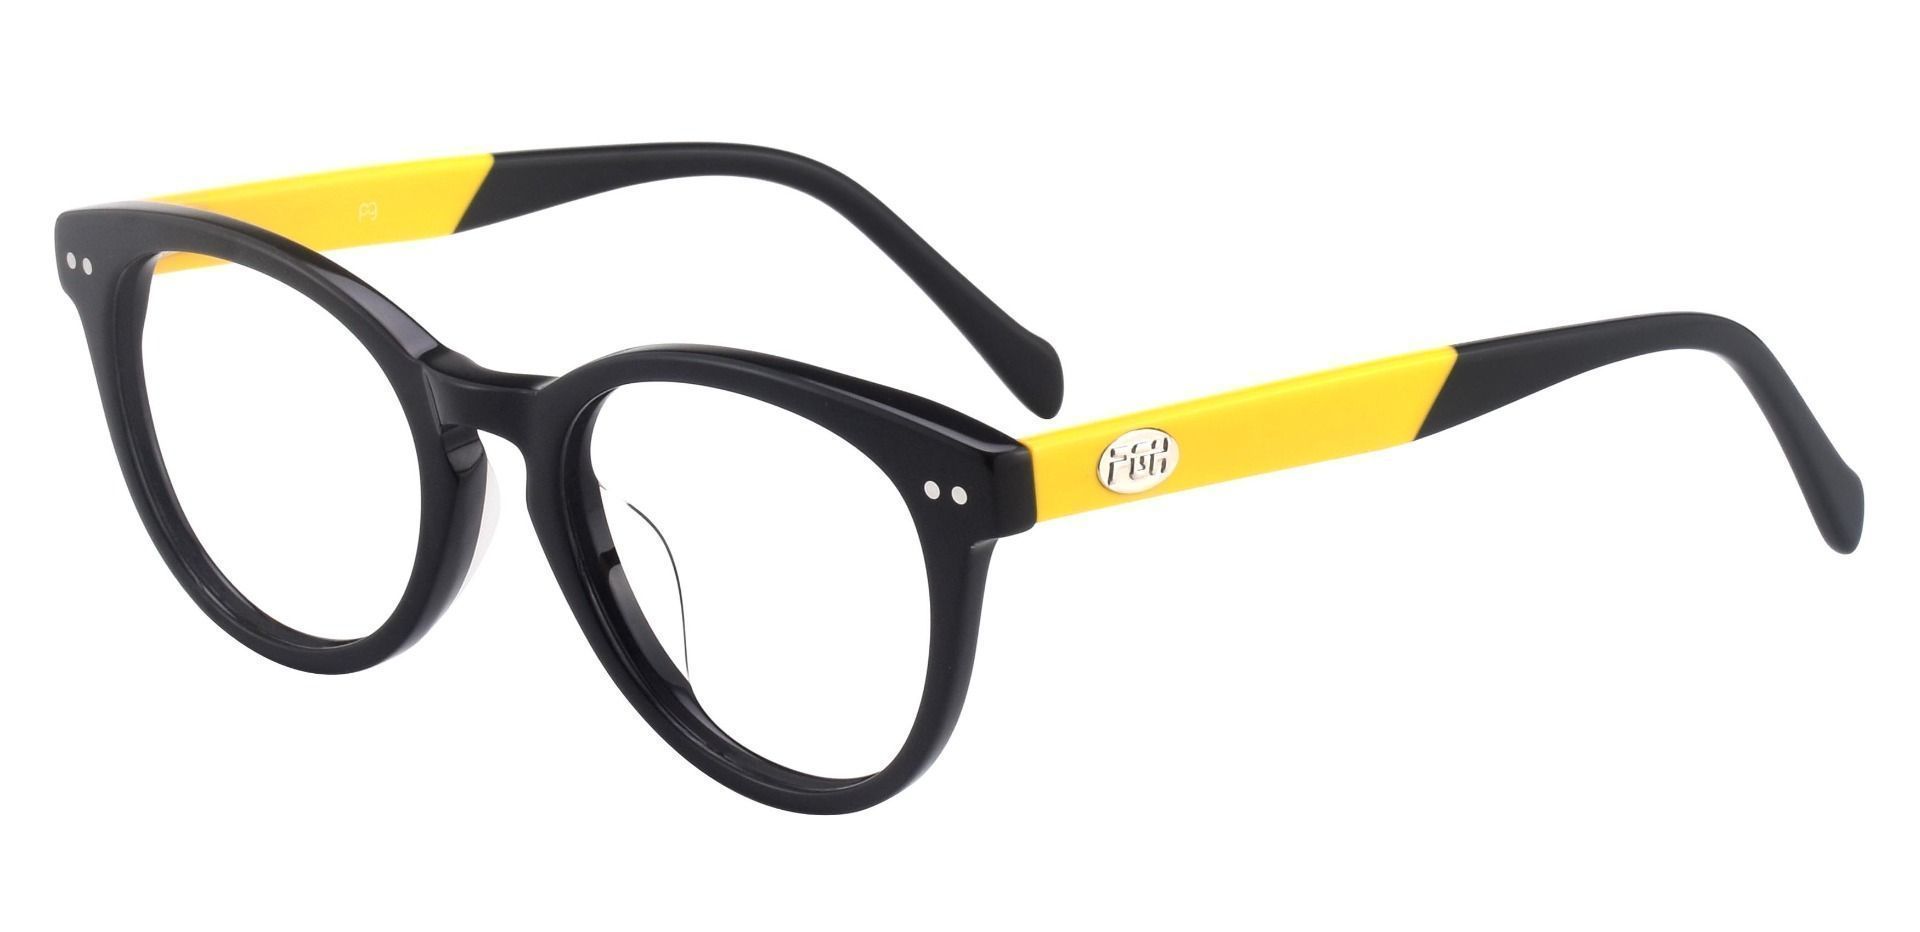 Forbes Oval Reading Glasses - The Frame Is Black And Gold